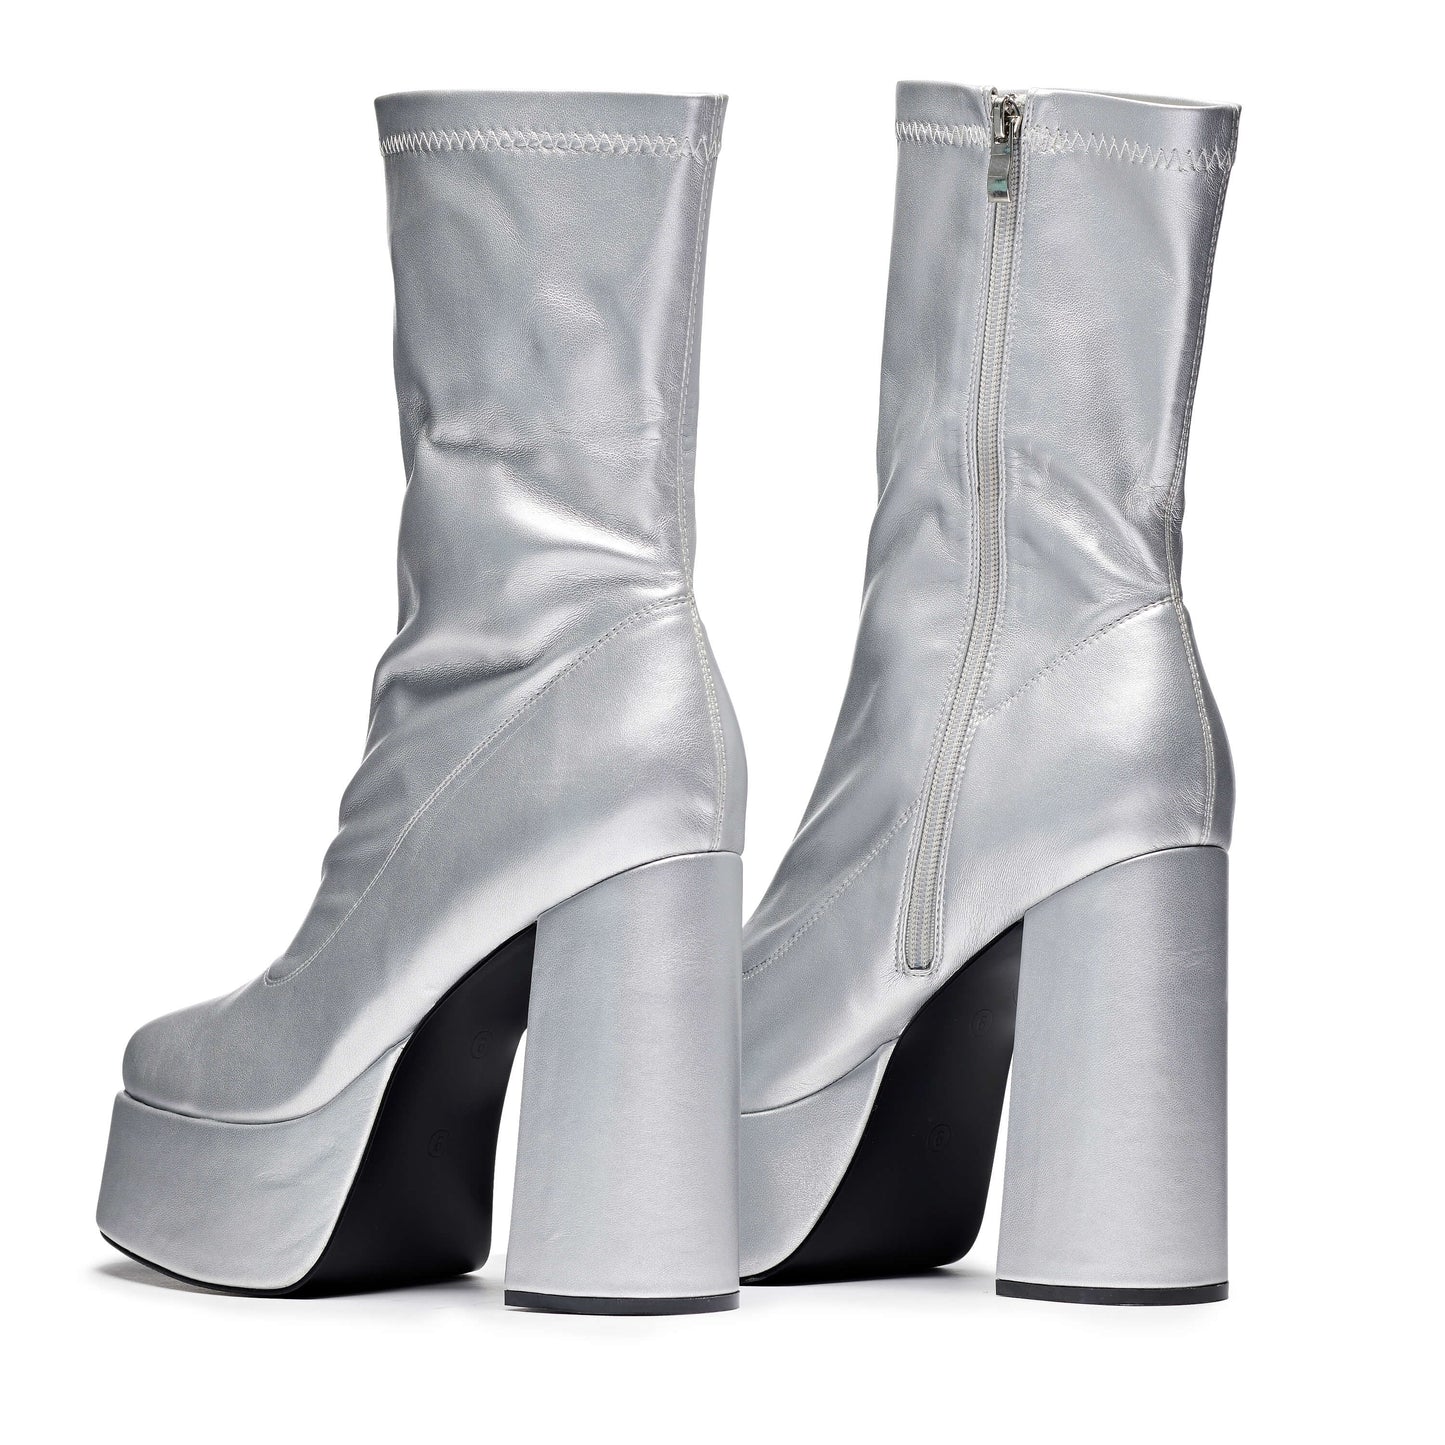 Delano Men's Silver Platform Heeled Boots - Ankle Boots - KOI Footwear - Silver - Back View